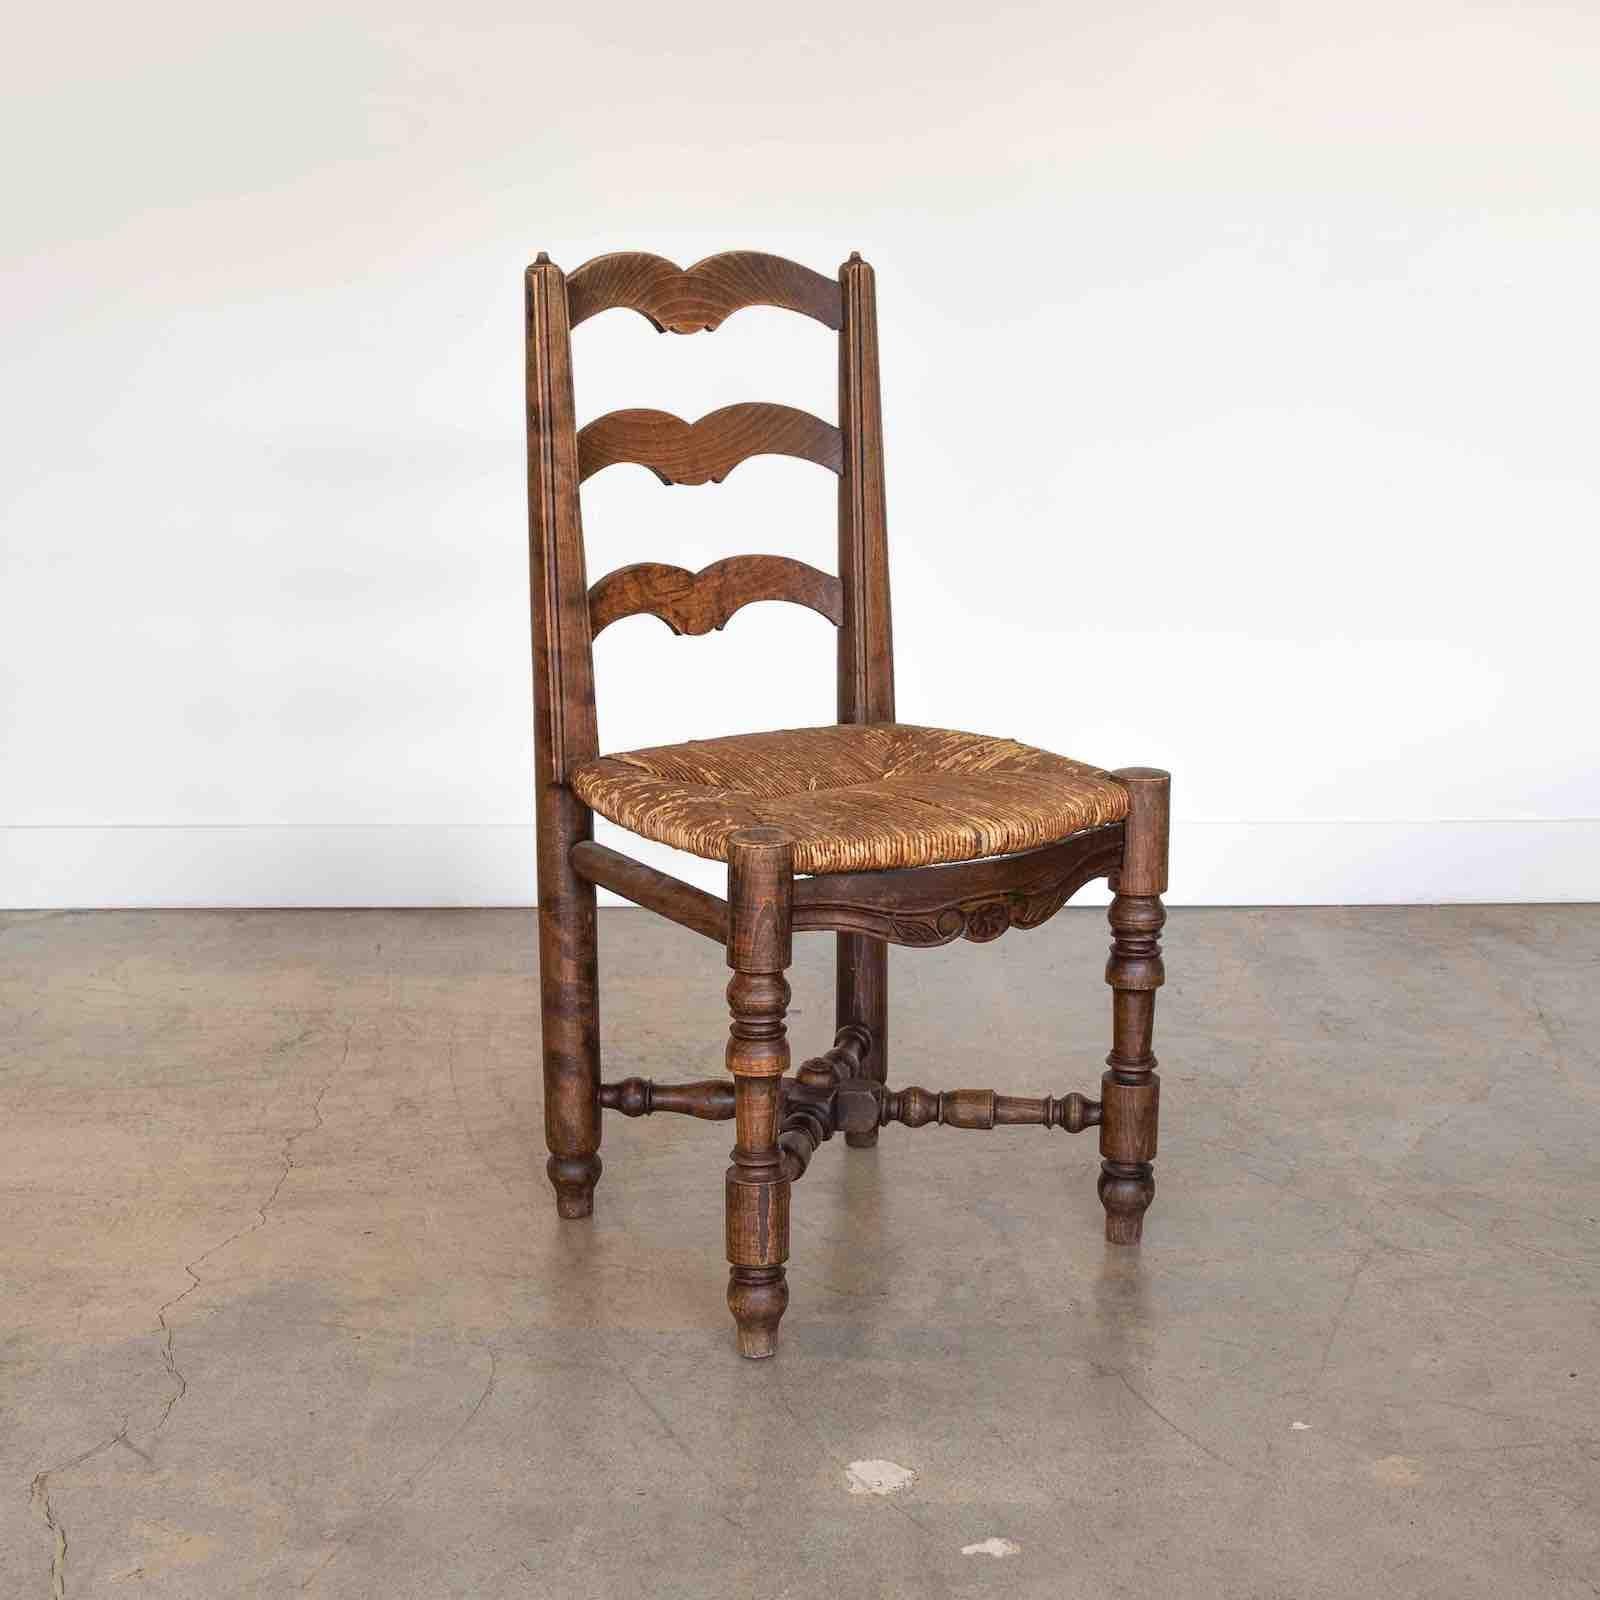 Beautiful carved wood chair from France, 1940s. Intricate carved wood legs and wood frame with scroll detail. Original woven rush seat and original wood finish show great age and patina. Perfect as a desk or side chair. 